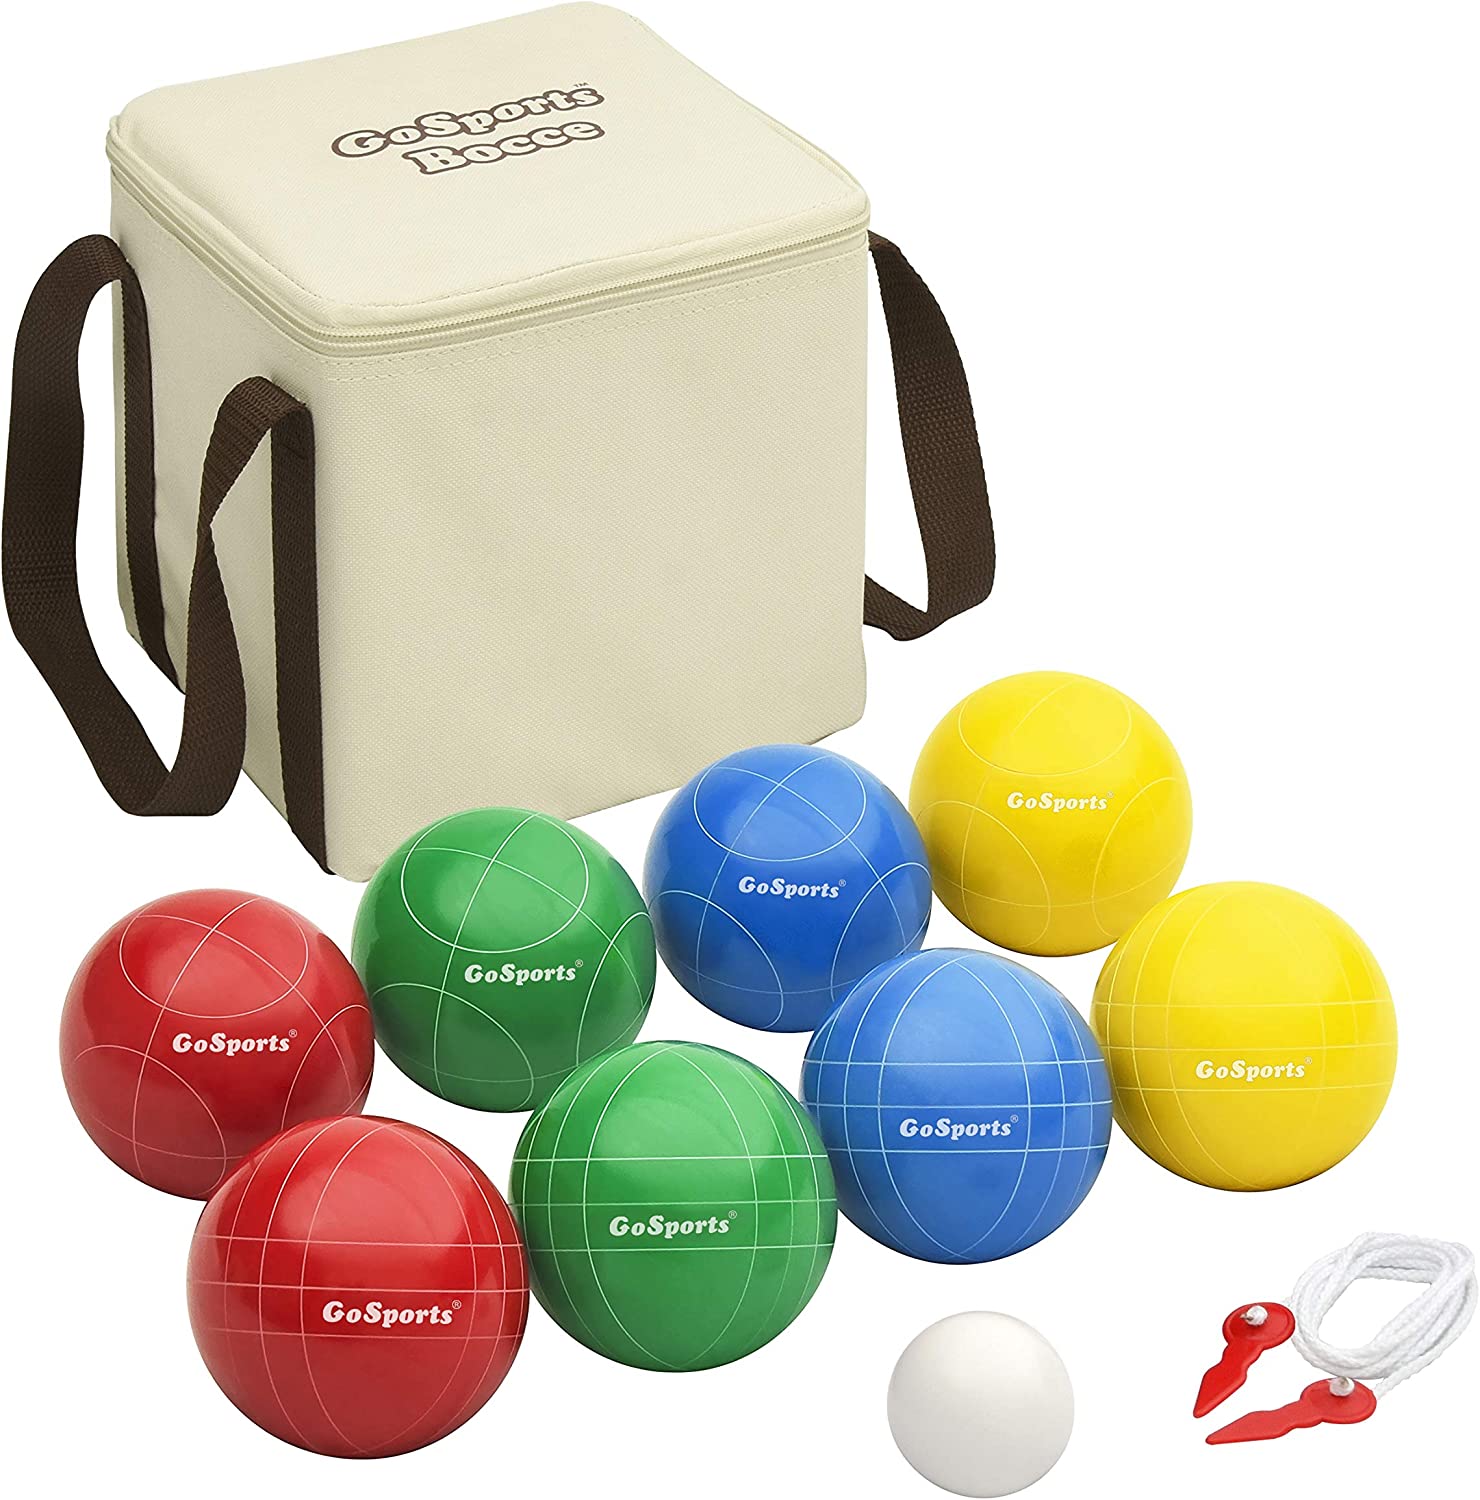 Tan carrying case, 8 red, green, blue and yellow bocce balls, small marking ball and materials to designate out of bounds 